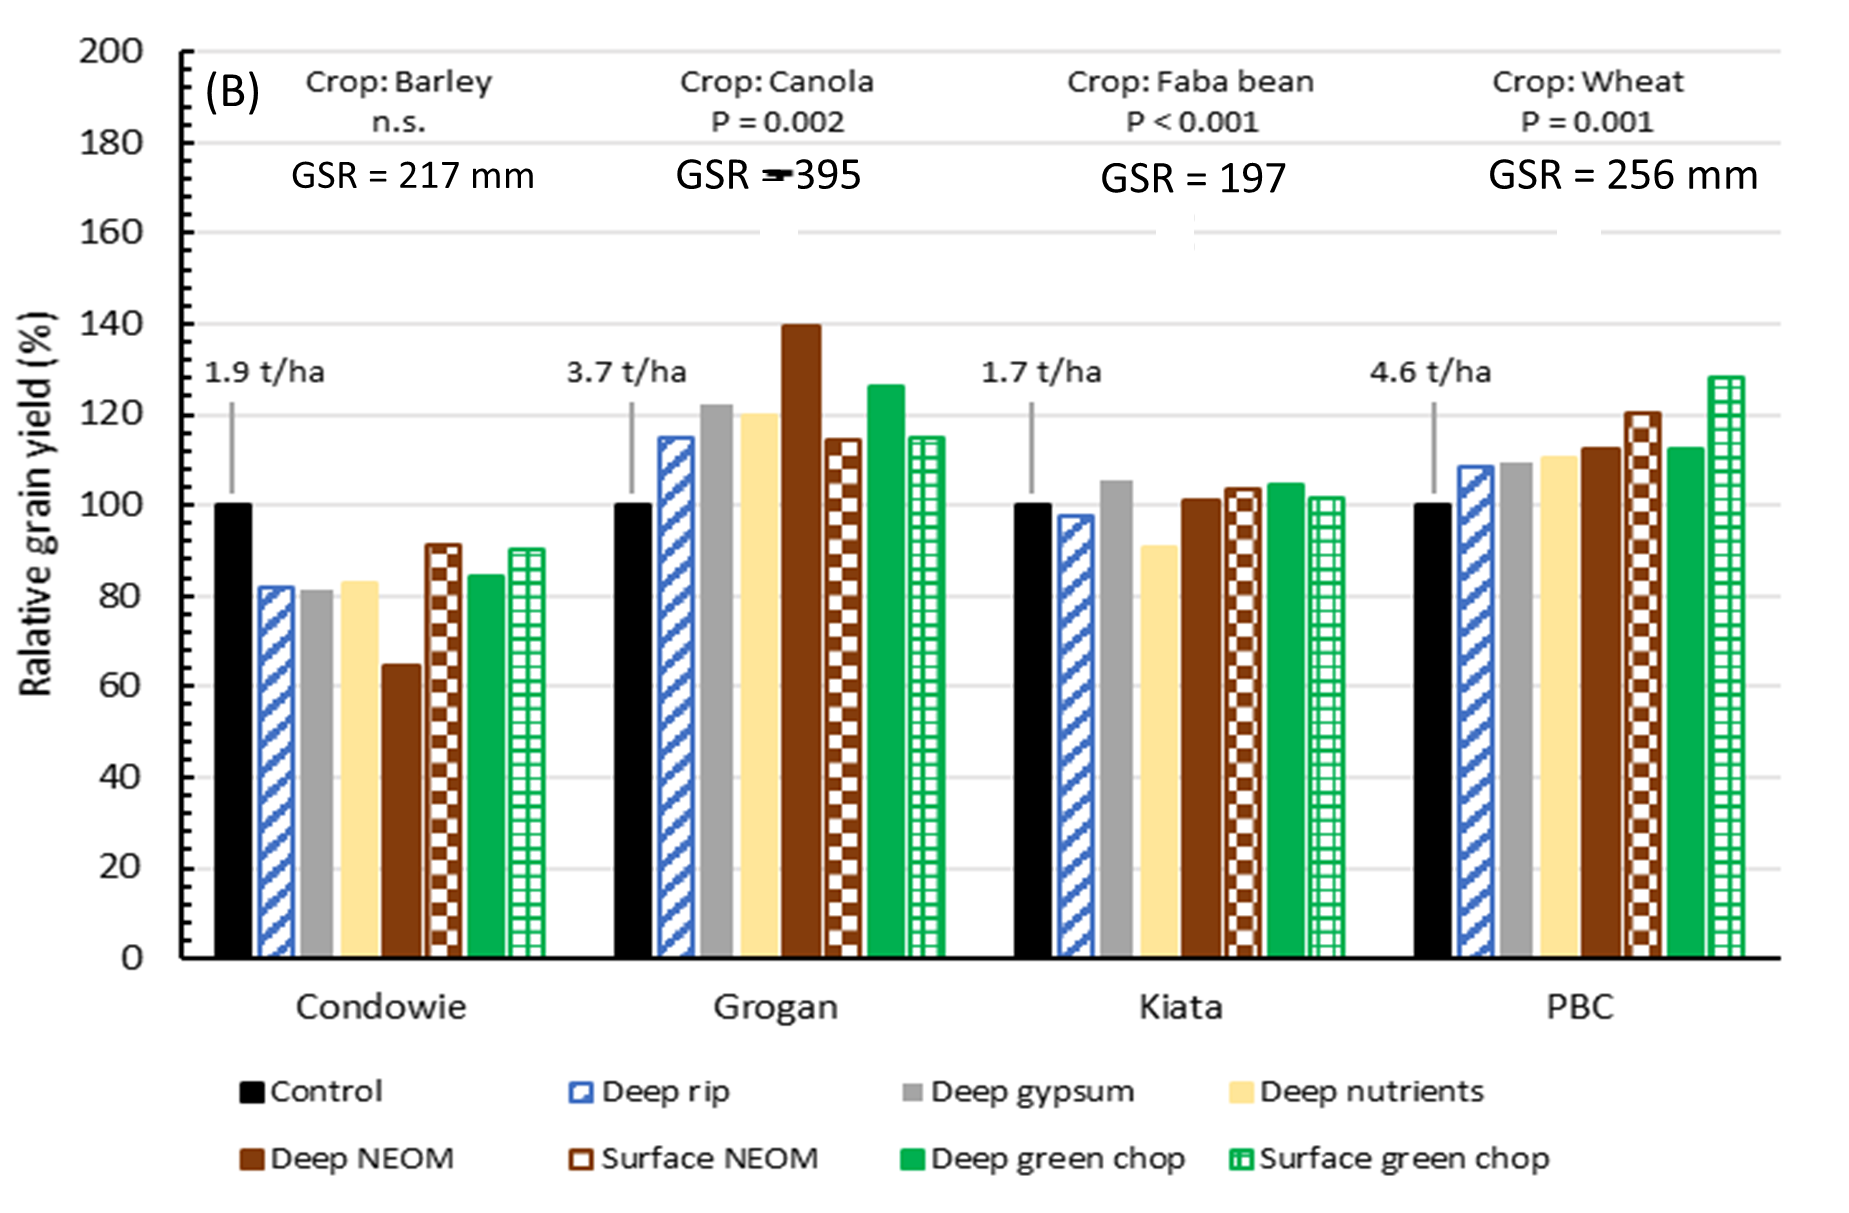 Relative grain yield response (%) of crops to different soil amelioration strategies with amendments applied either to the soil surface or subsoil (deep) at four sites in (A) the HRZ and (B) MRZ of south-eastern Australia. GSR = growing season rainfall (mm). The relative yield of the control treatment (no amelioration) = 100% with the value above this treatment expressed as grain yield (t/ha). ‘NEOM’ = animal manure pellets; ‘green chop’ = lucerne or field pea hay pellets. Organic amendments applied at either20t/ha (HRZ) or 15t/ha (MRZ); Deep nutrients represents the equivalent rate of N (and P) applied in the green chop. n.s. = not significant (at P = 0.05) 